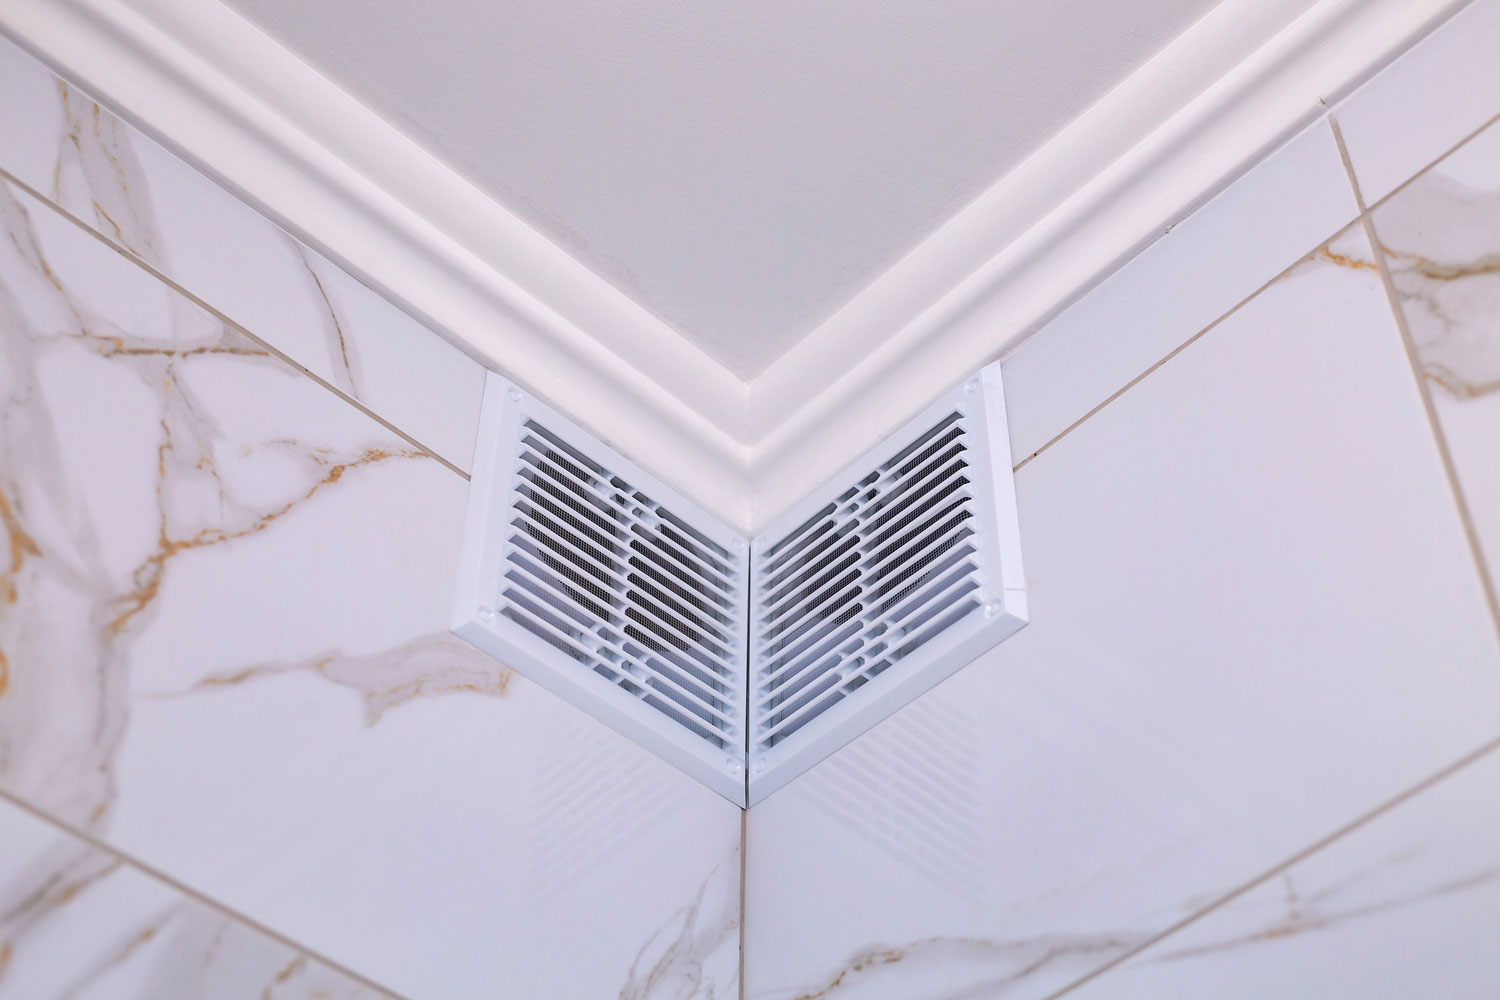 Two wall vents at a wall with marble cladding